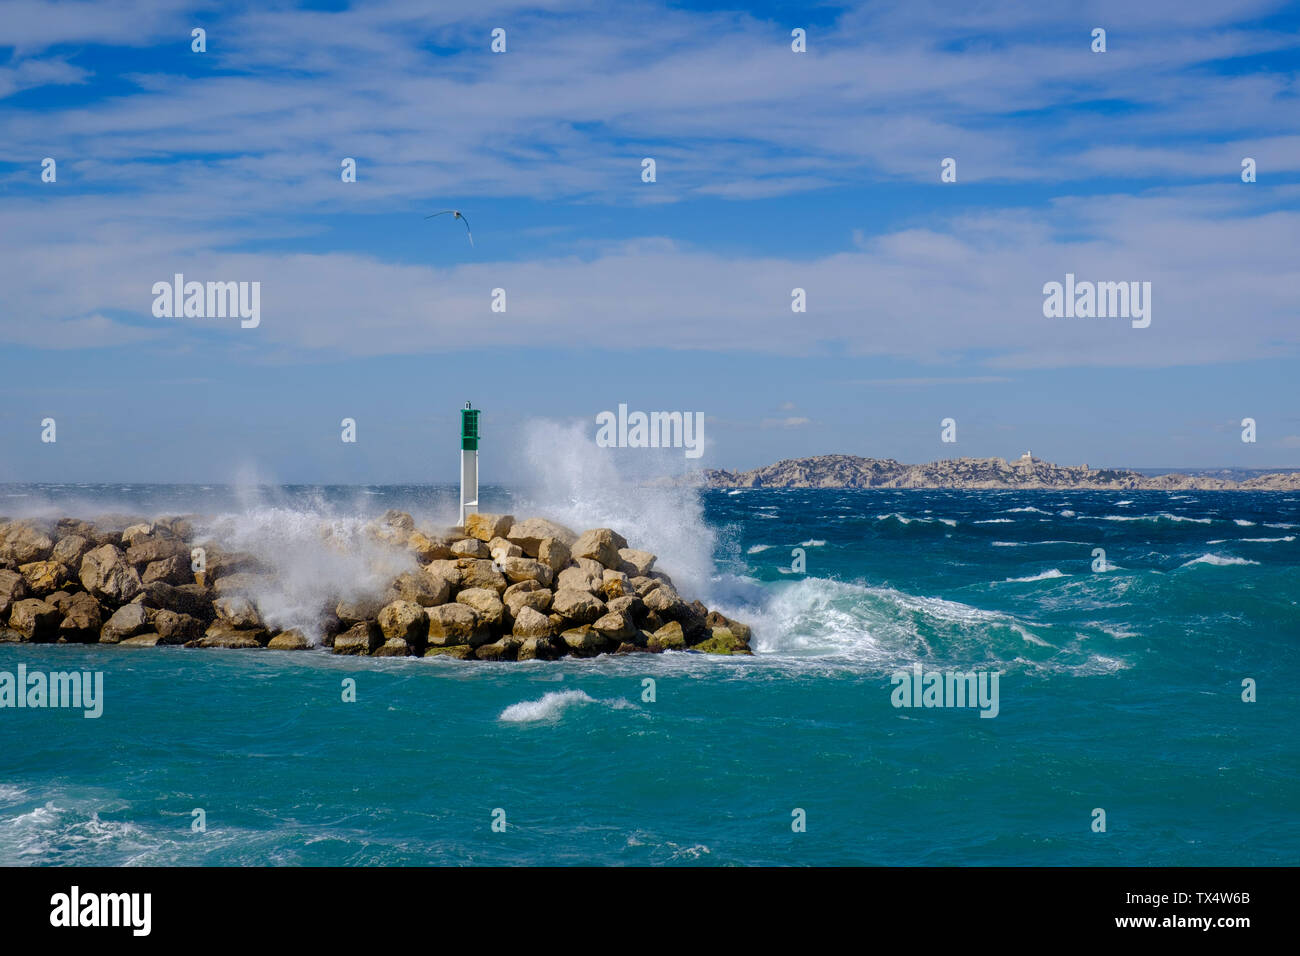 France, Marseille, Place Florence Arthaud, La Madrague, strong waves at a jetty with lighthouse Stock Photo